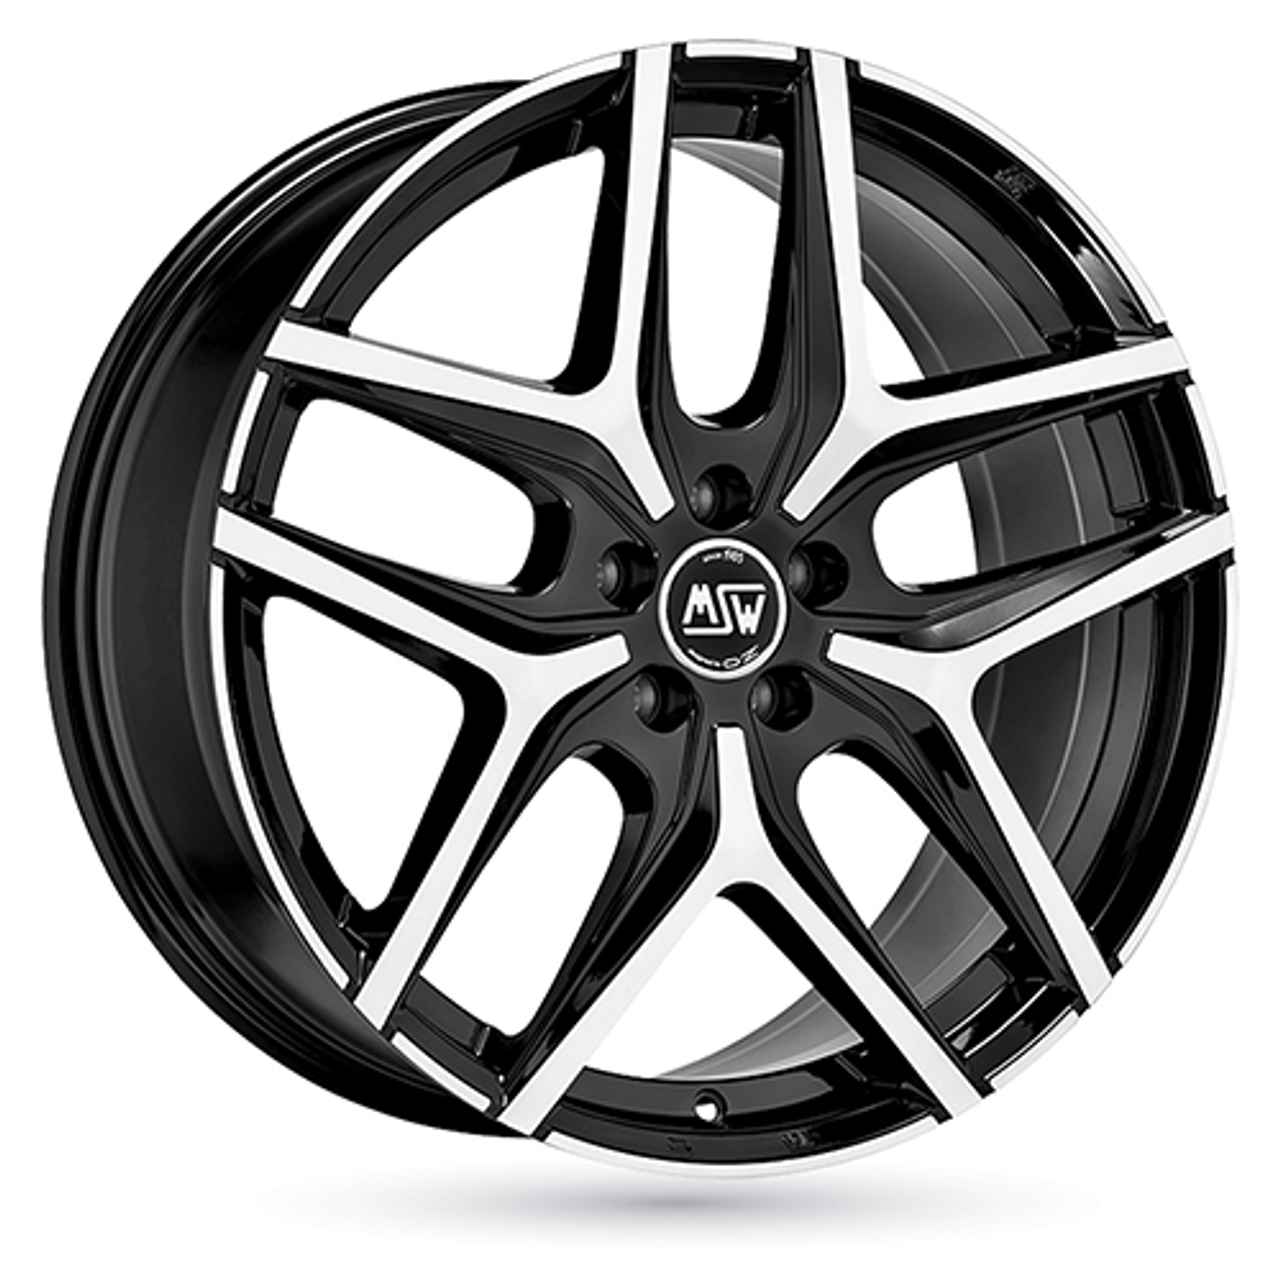 MSW (OZ) MSW 40 gloss black full polished 9.0Jx20 5x112 ET26